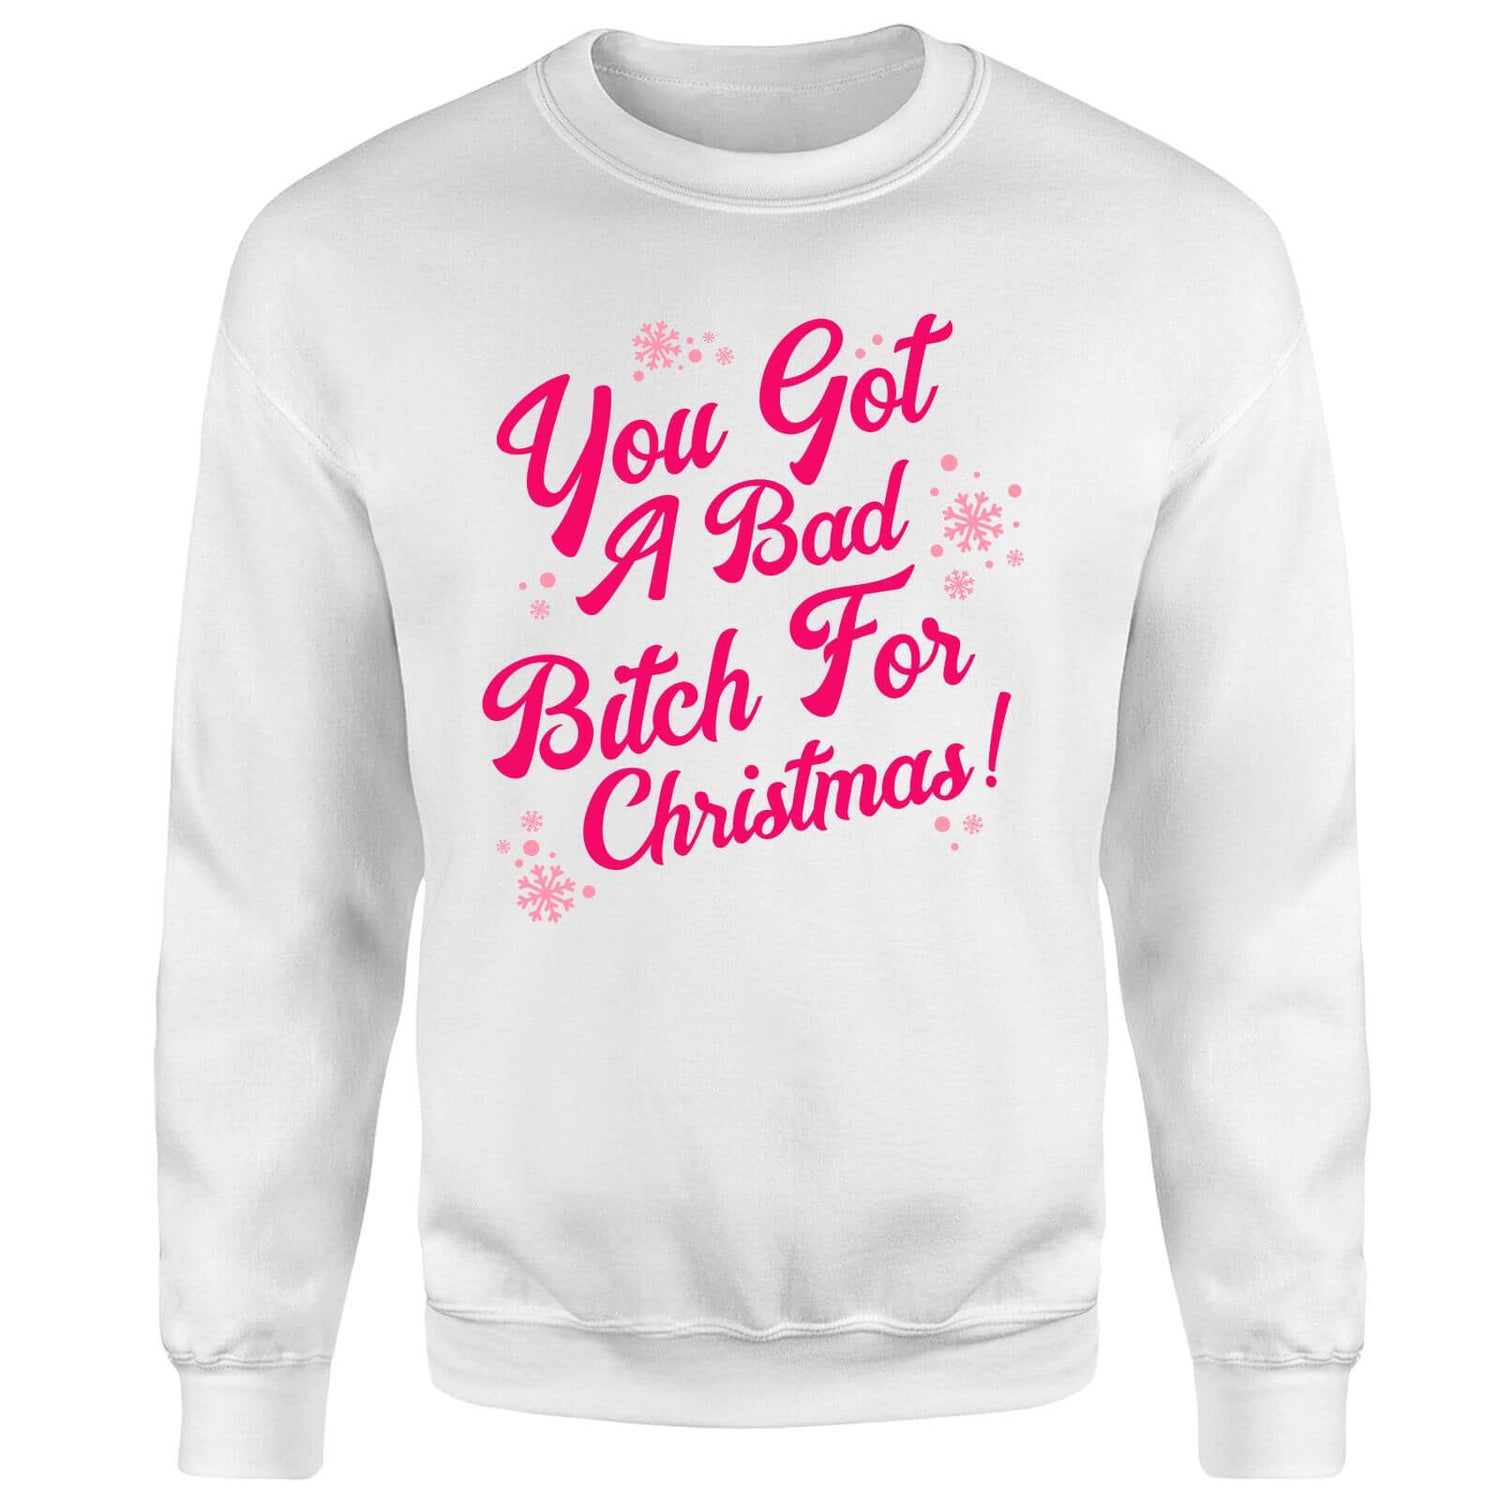 Snowy You Got A Bad Bitch For Christmas Unisex Christmas Jumper - White